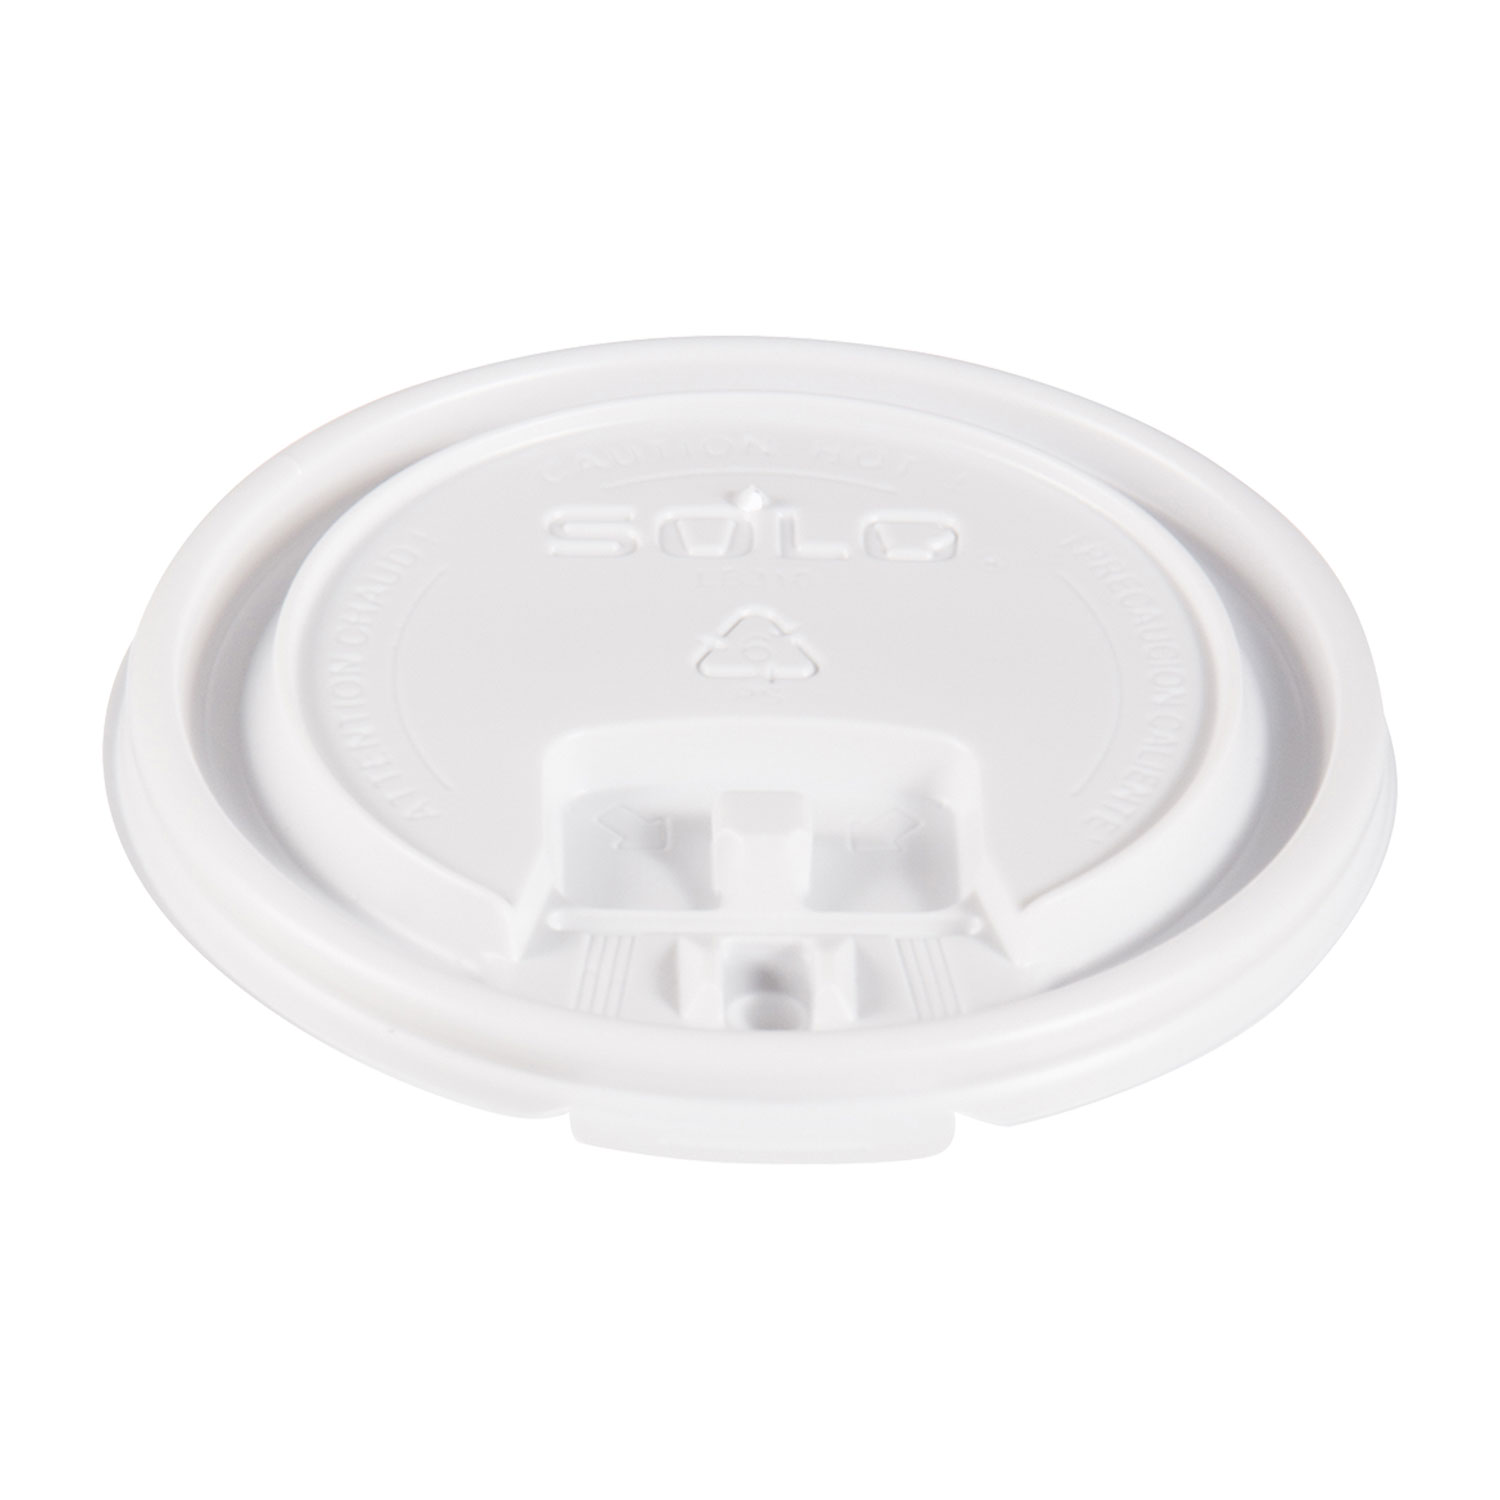  Dart LB3101-00007 Lift Back and Lock Tab Cup Lids, for 10oz Cups, White, 100/Sleeve, 20 Sleeves/CT (SCCLB3101) 